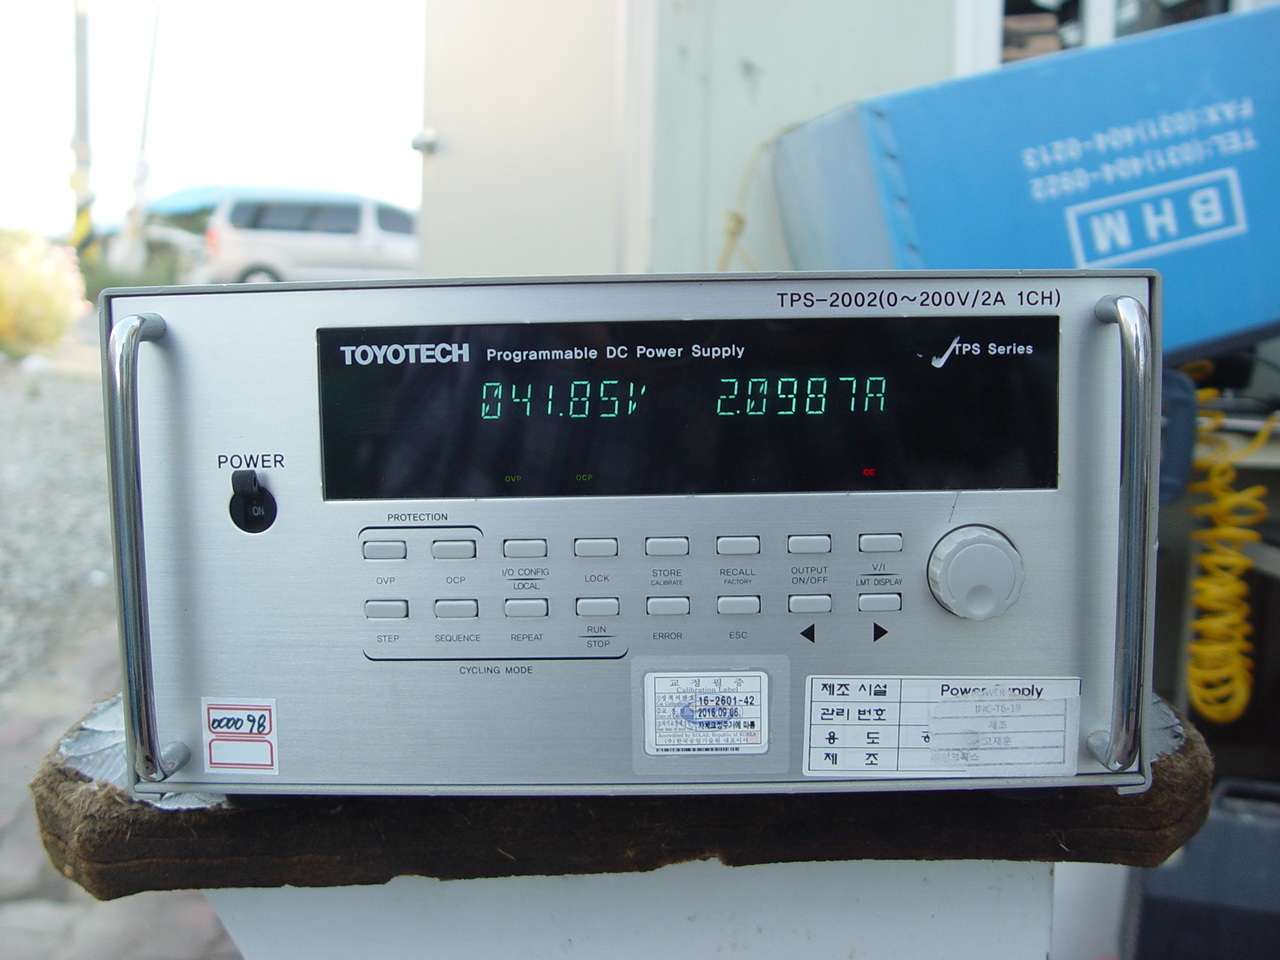 [A5679] TOYOTECH PROGRAMMABLE DC POWER SUPPLY DC 200V 2A TPS-2002